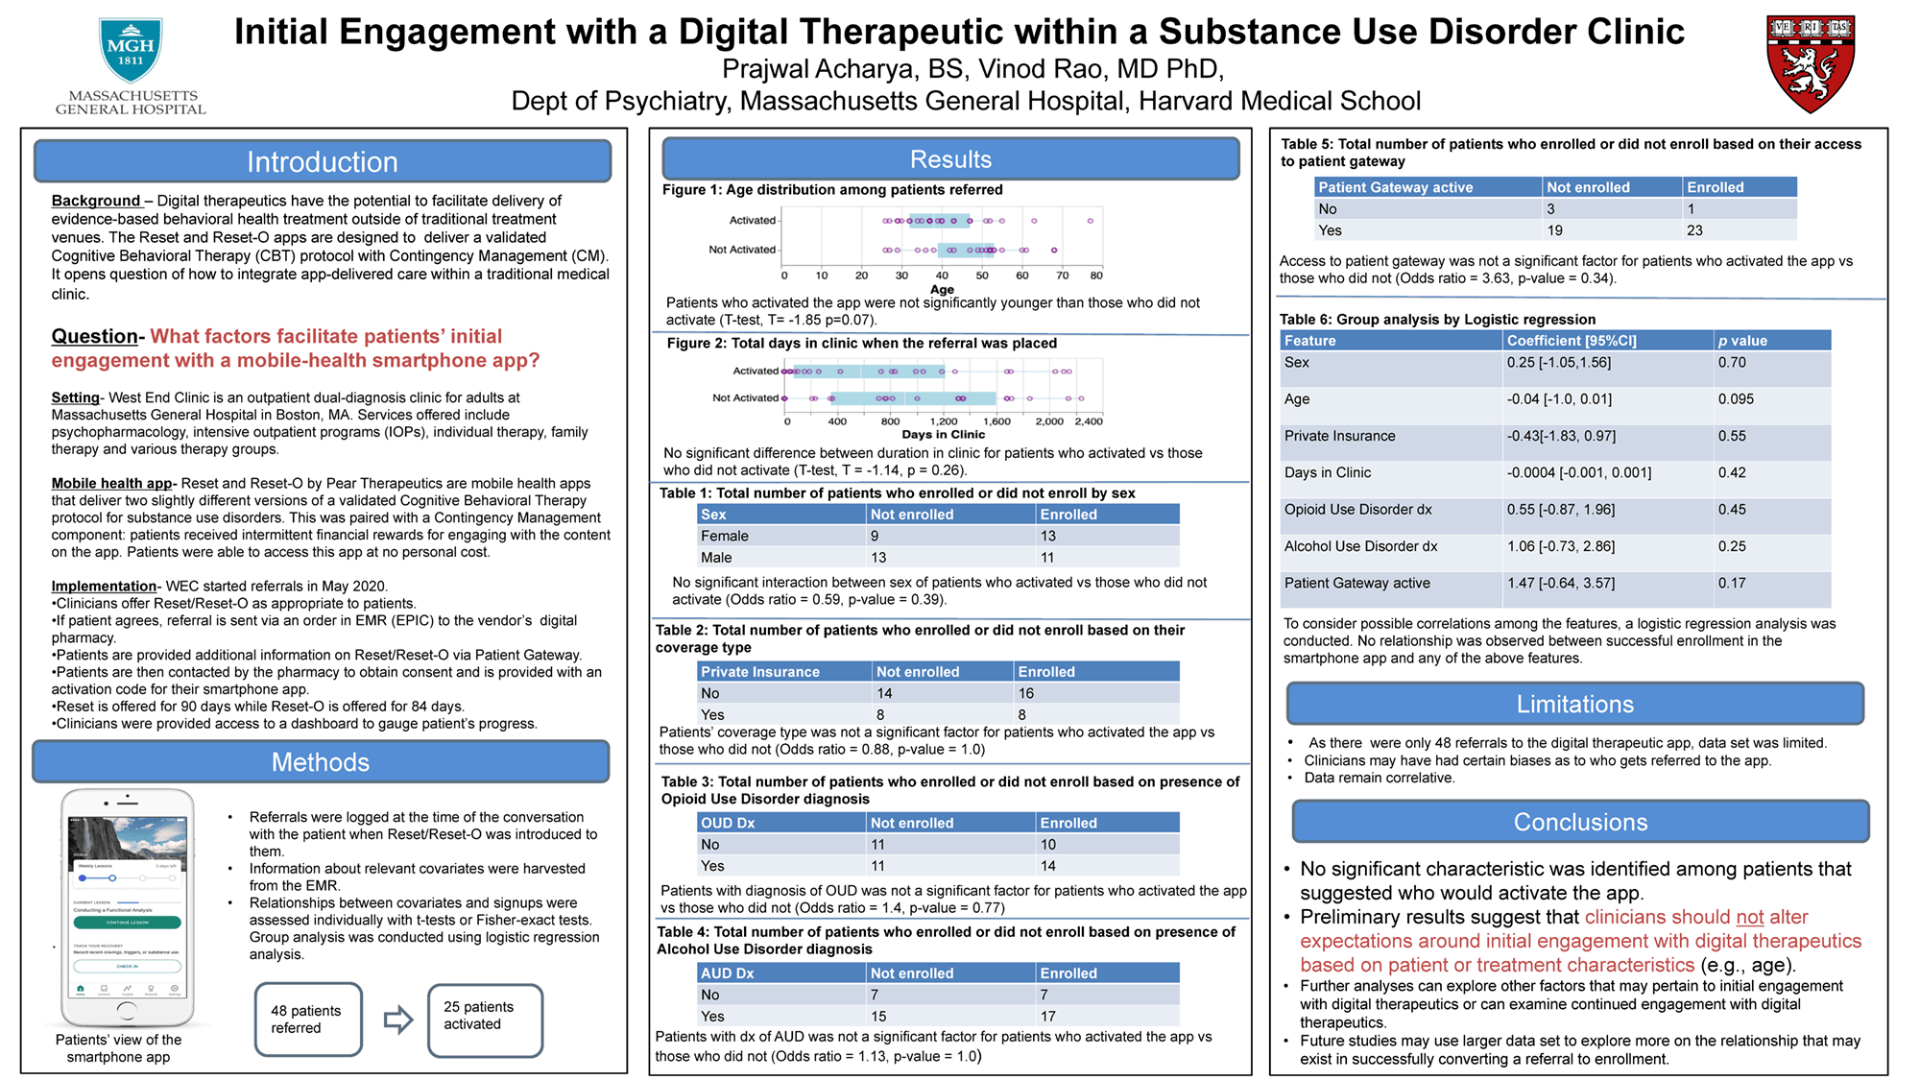 Initial Engagement with a Digital Therapeutic within a Substance Use Disorder Clinic